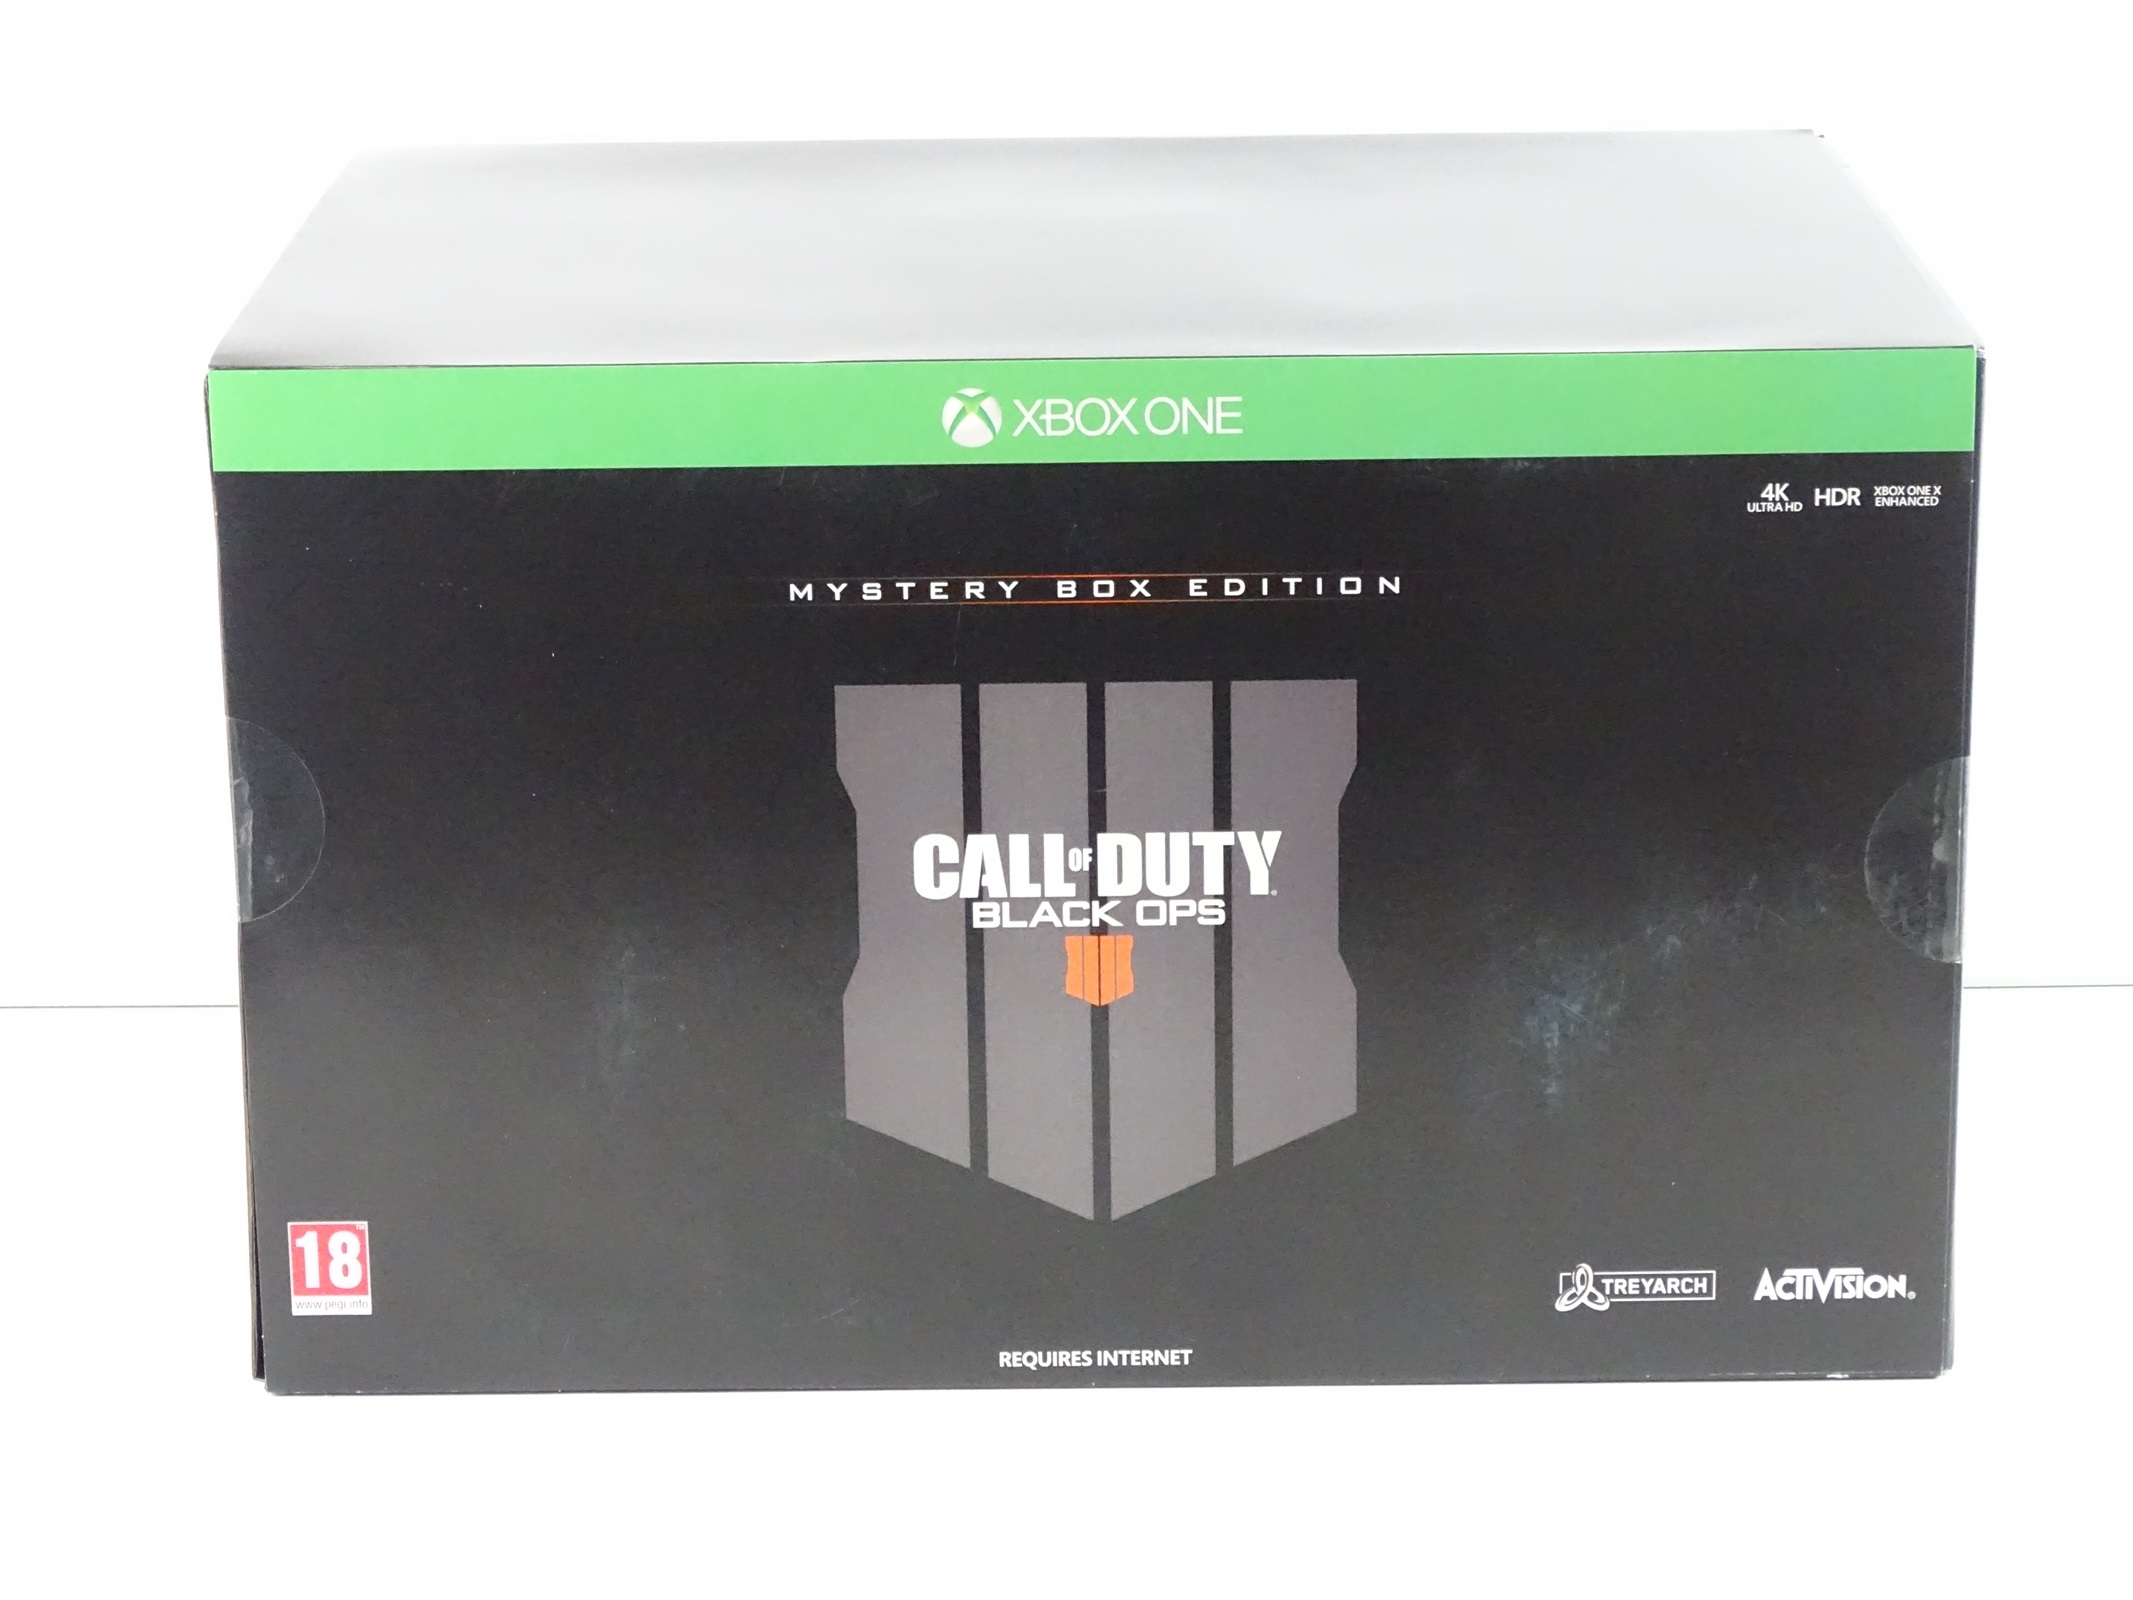 Viool Berucht Doe mee Lot 151 - Call of Duty Black Ops Mystery Box Edition